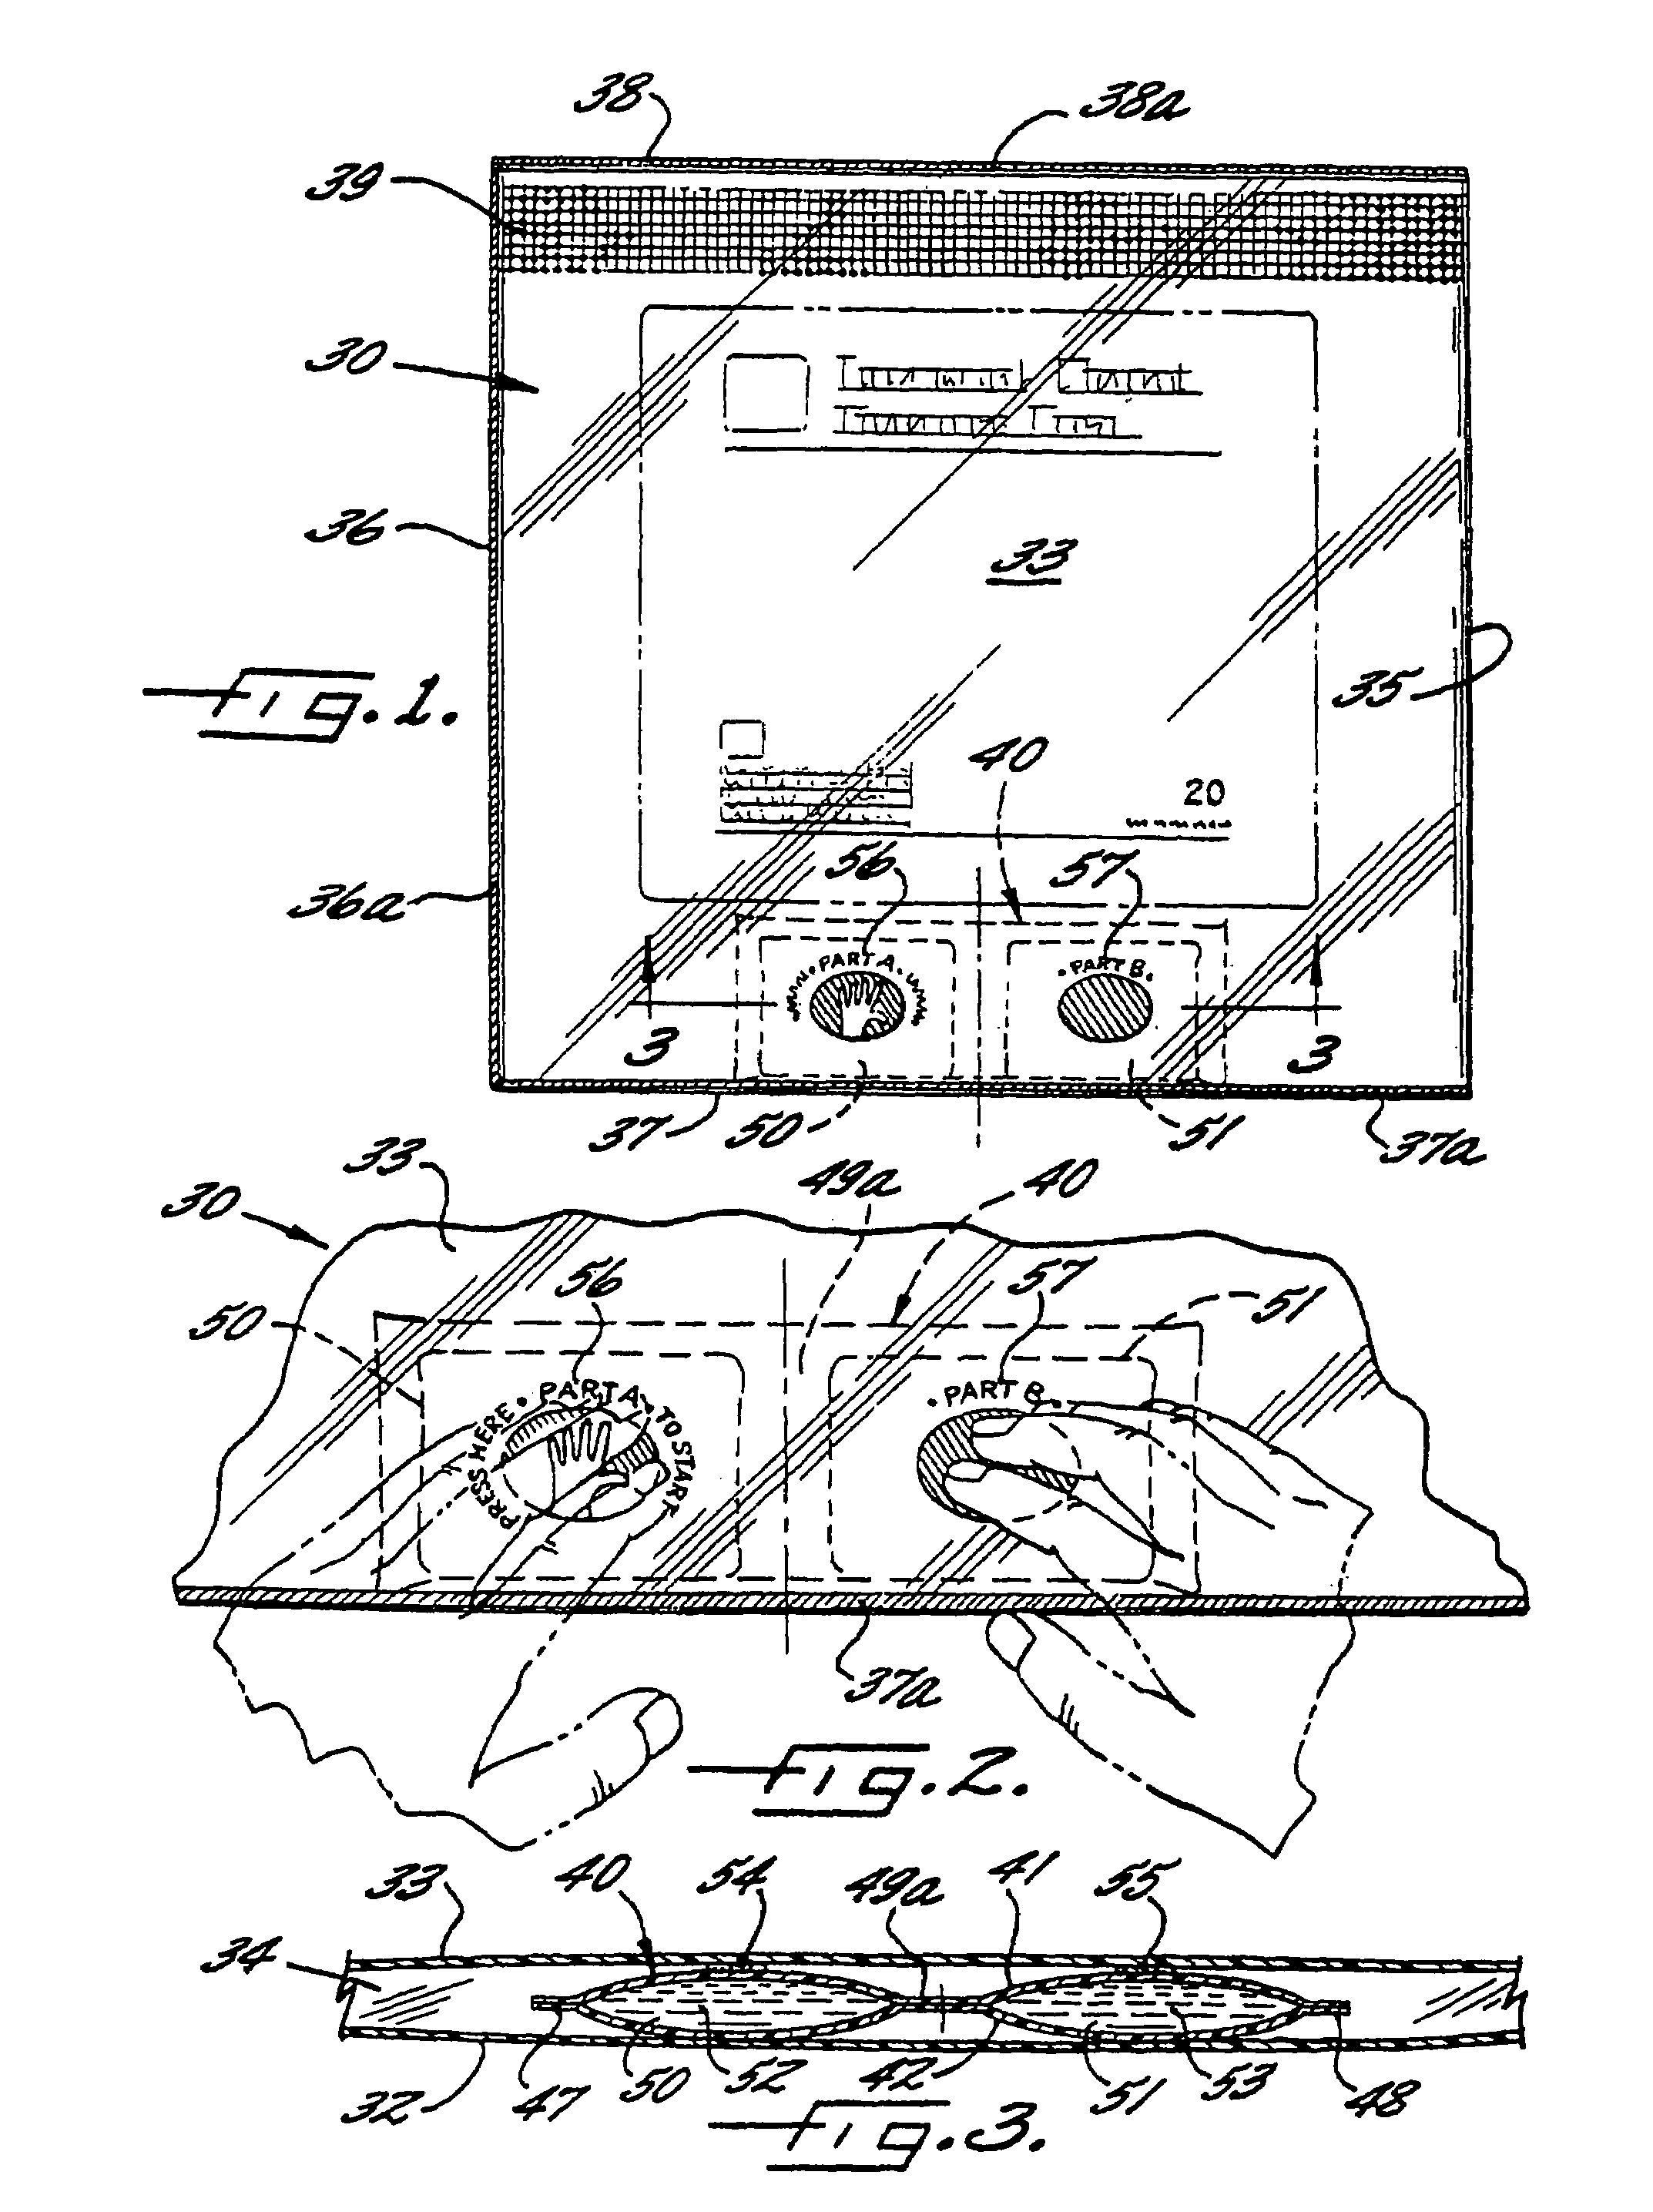 Foam in bag packaging system and method for producing the same